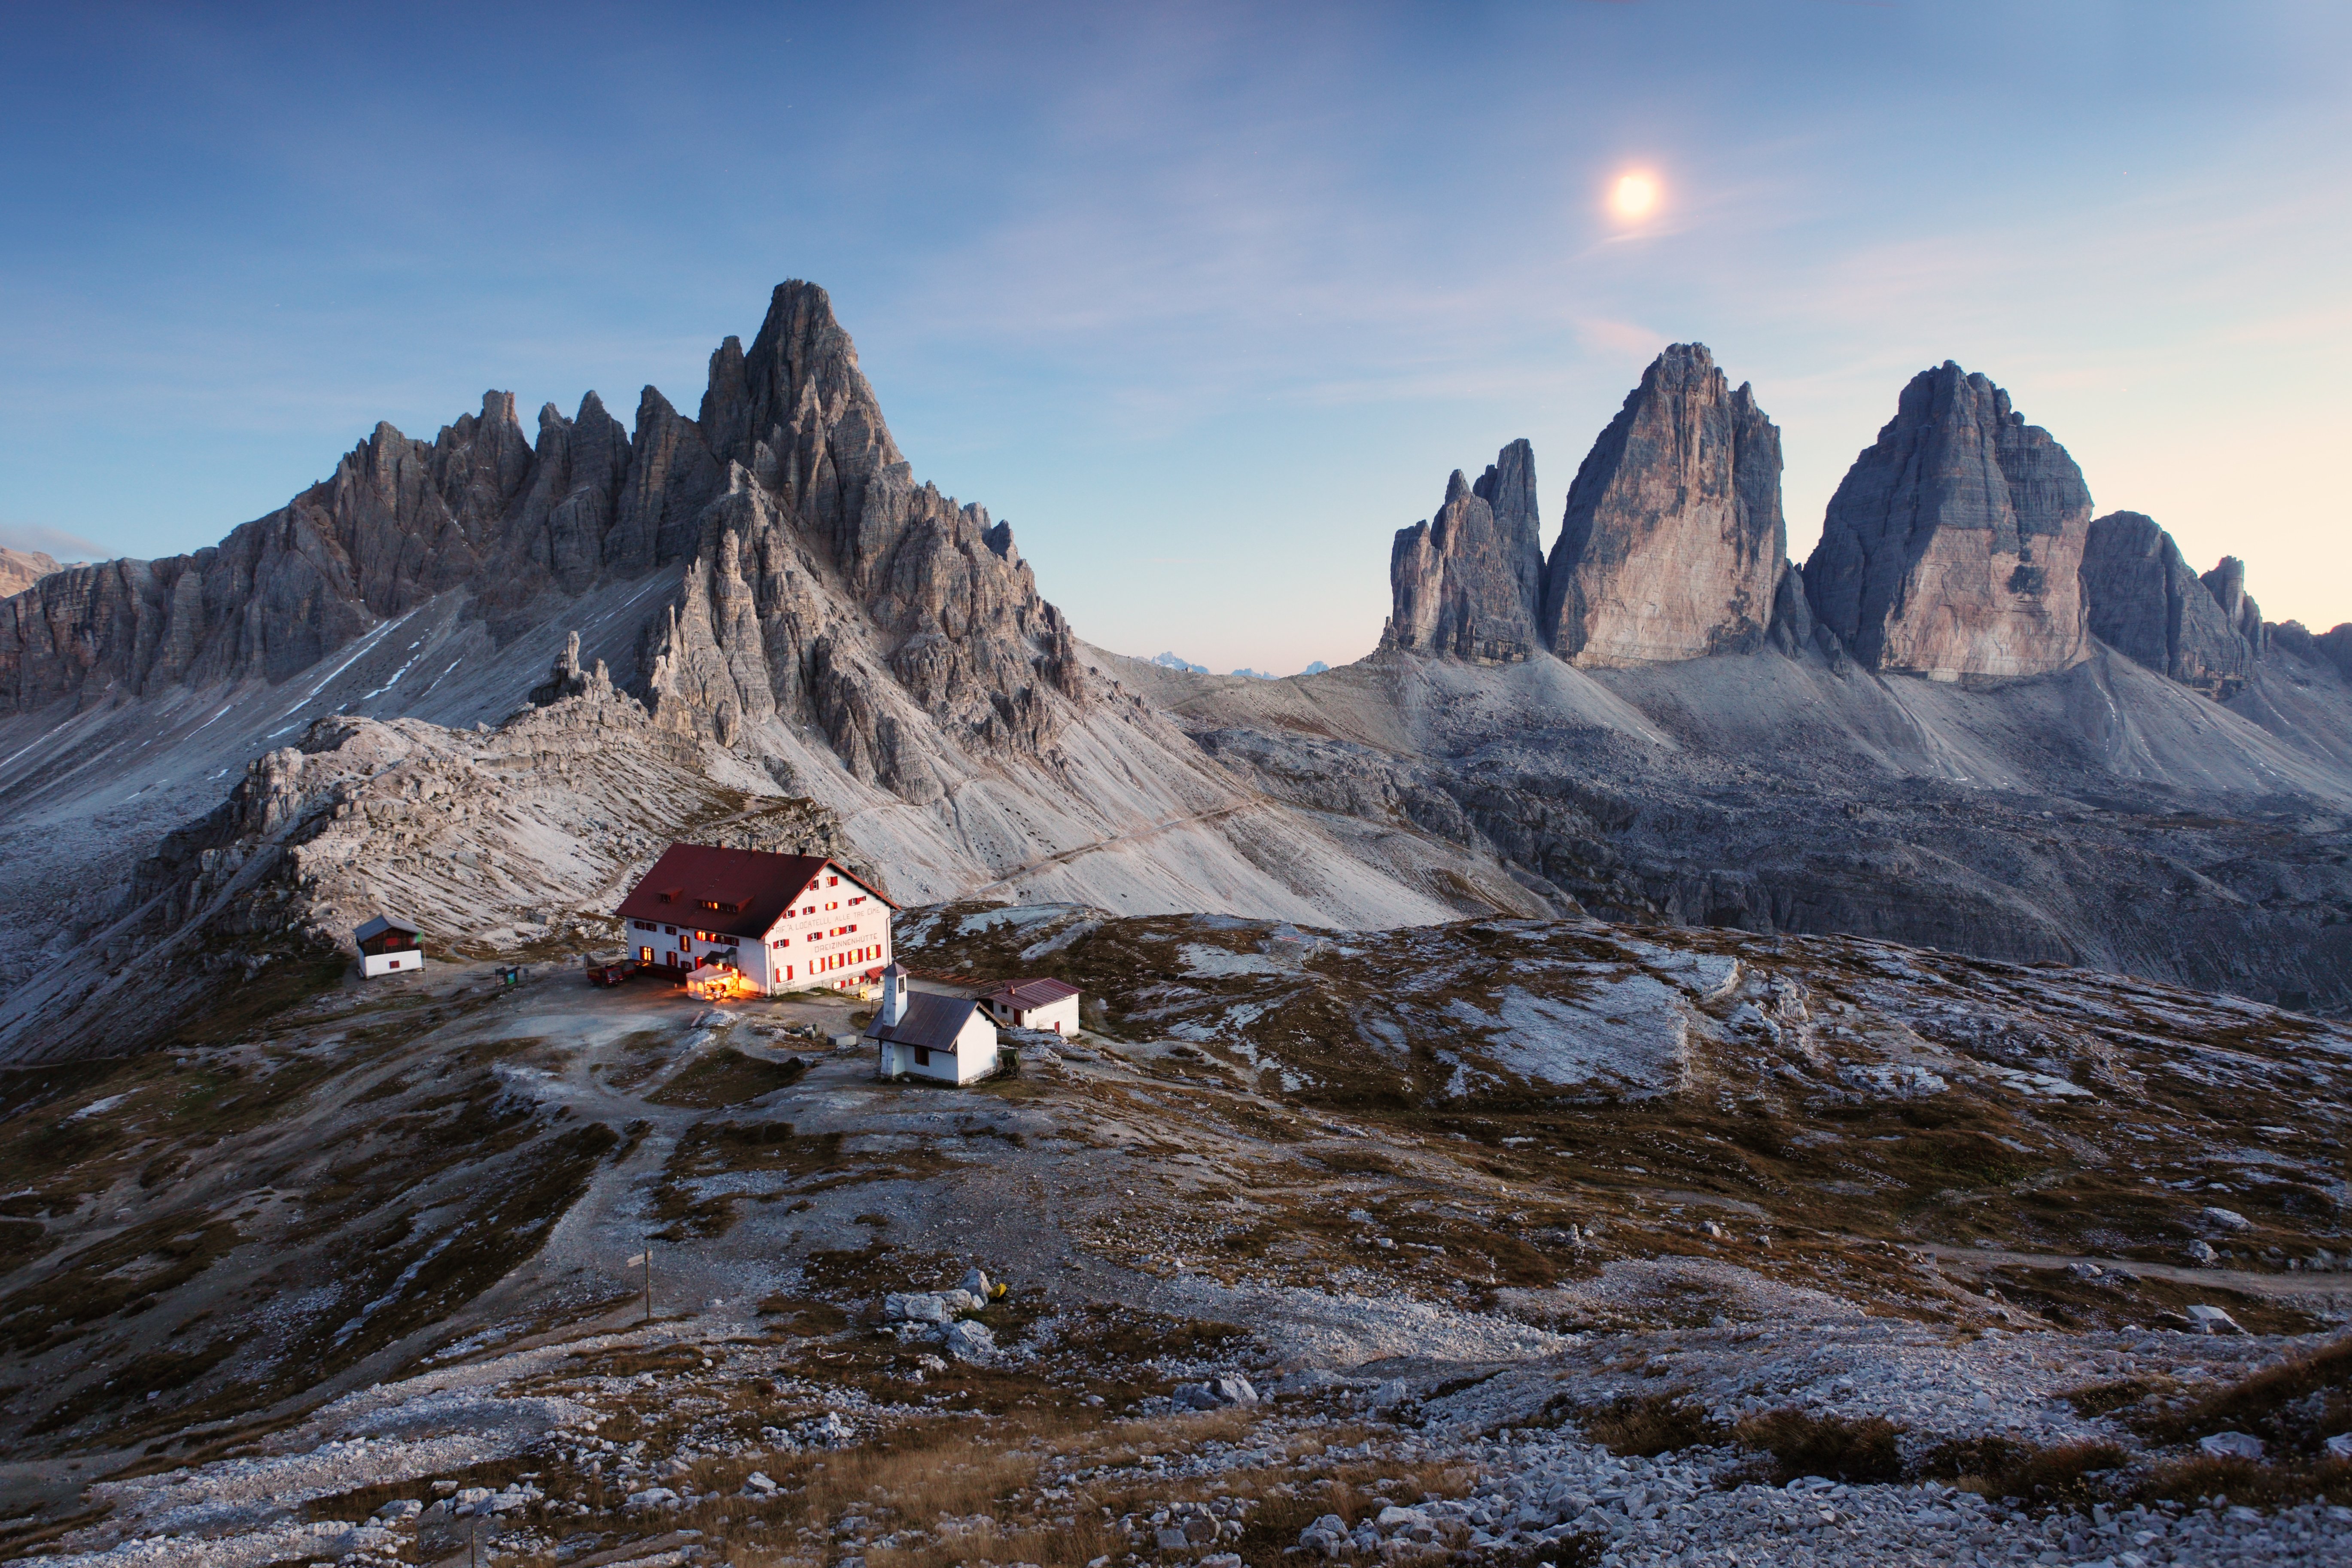 italy, Dolomite, Alps, Three, Peaks, House, Mountains, Snowy, Land, Sunset, Beautiful, Nature, Landscape, Sky Wallpaper